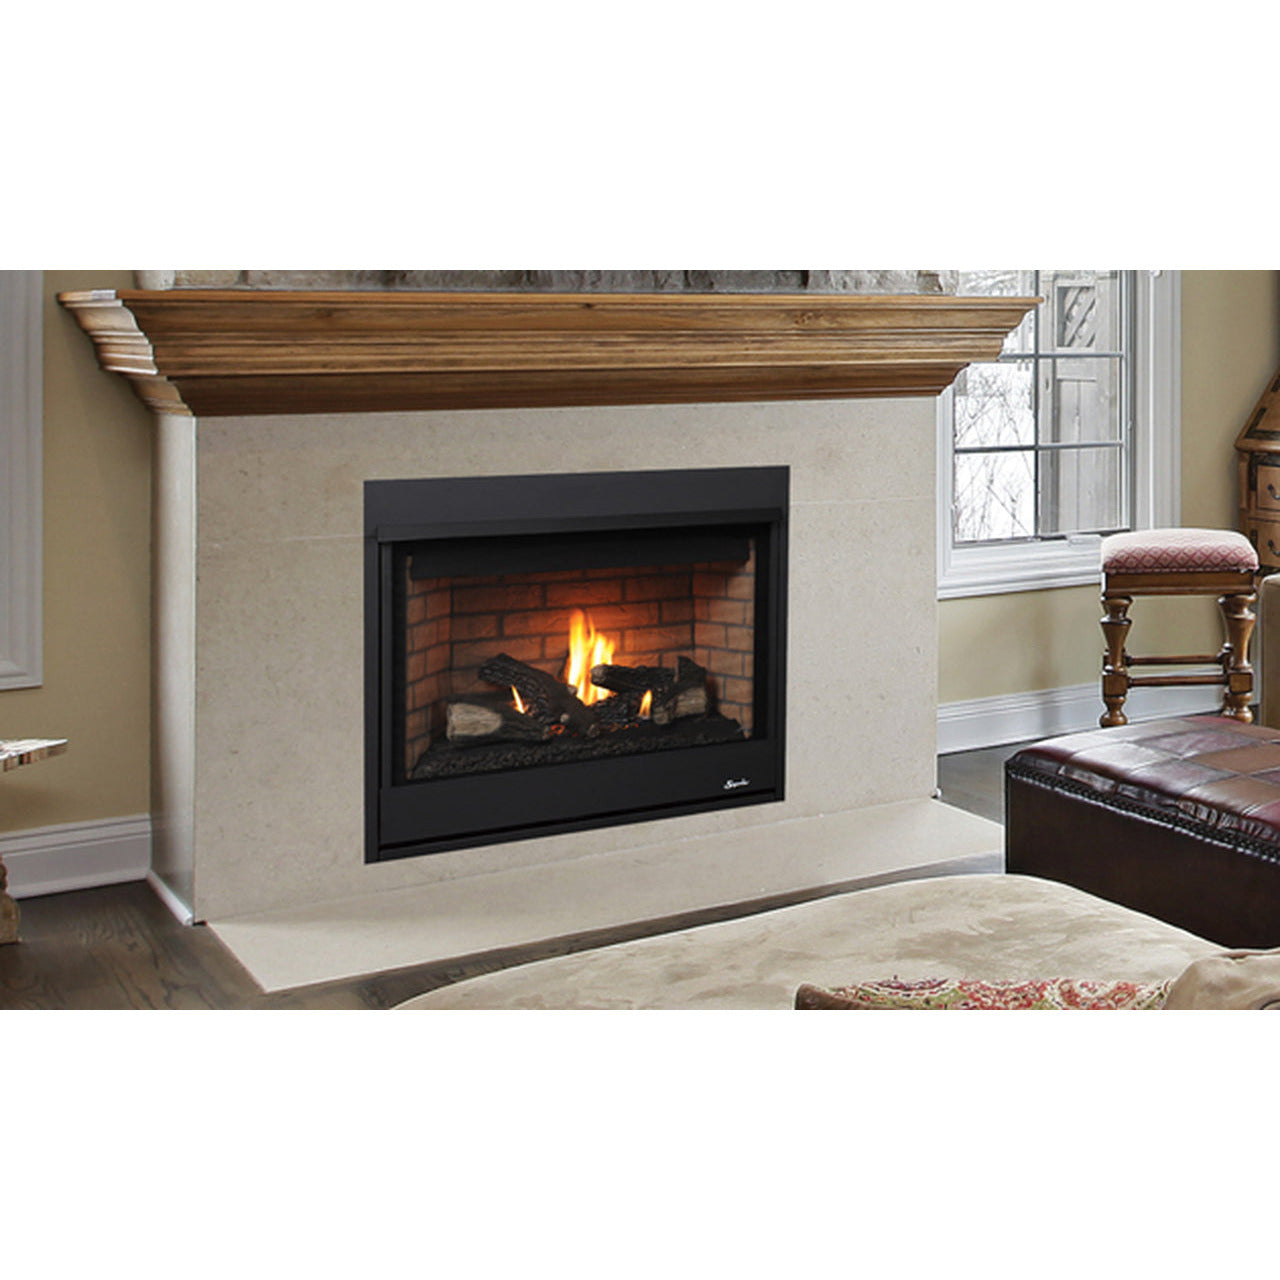 Superior 35" Direct Vent Traditional Gas Fireplace DRT3035